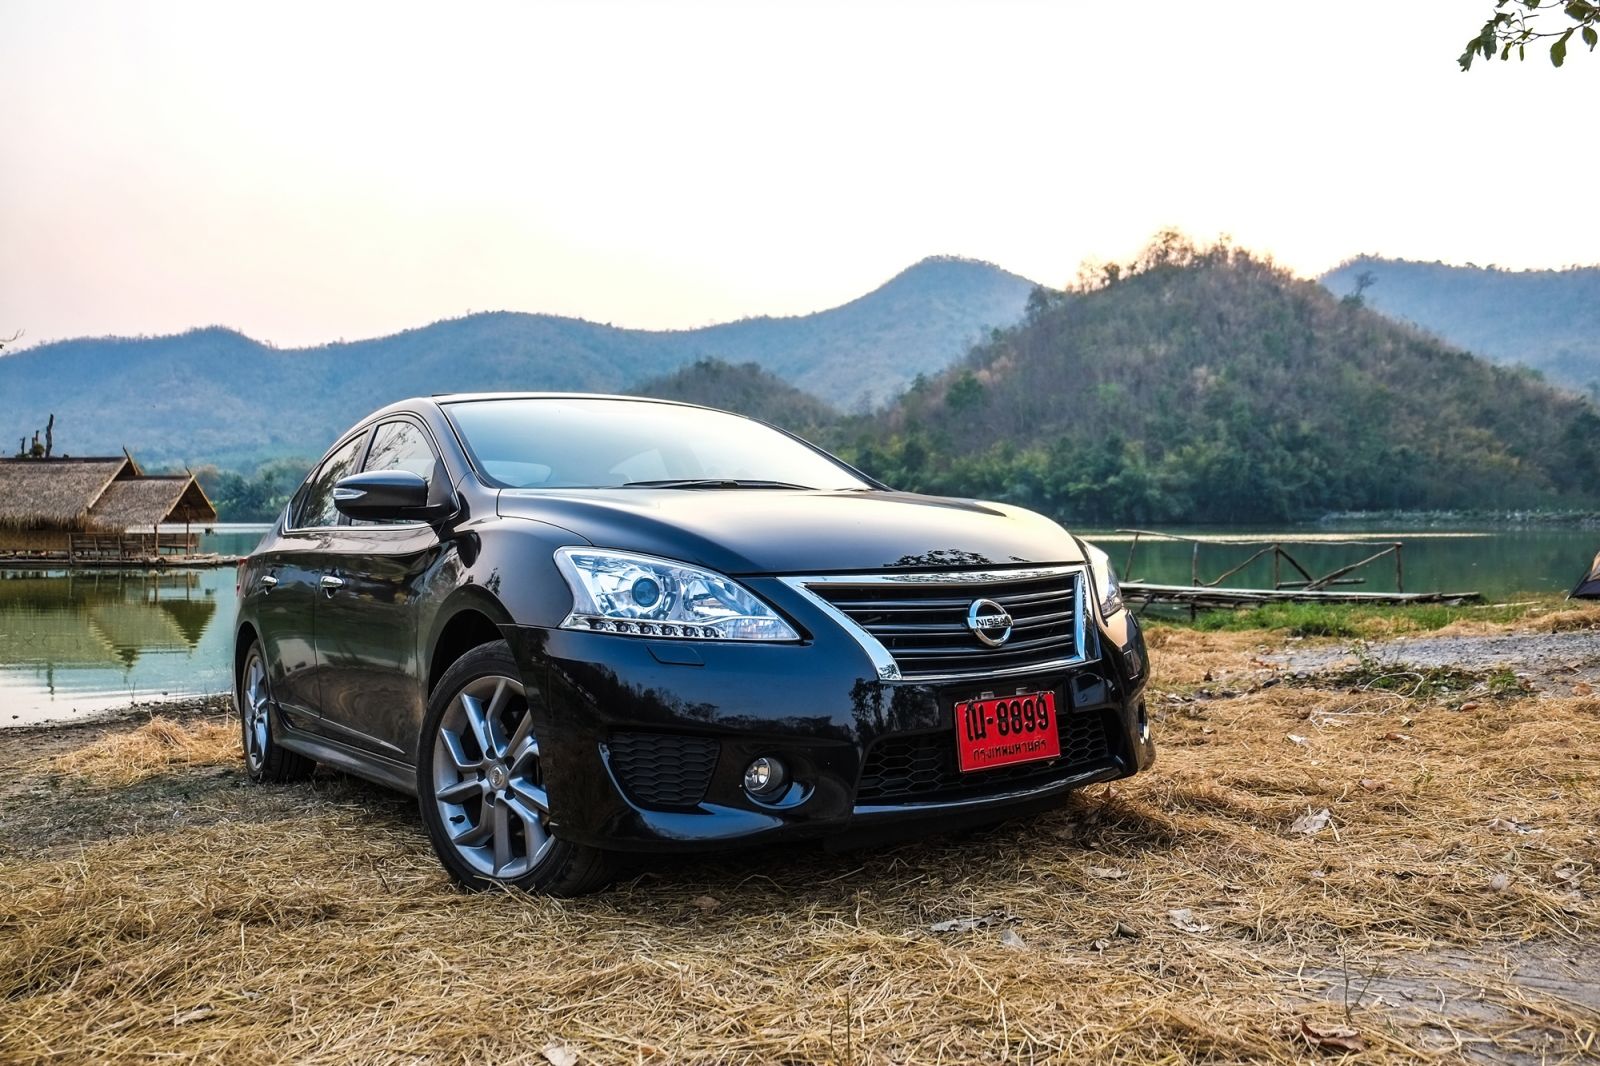 Nissan Sylphy Turbo